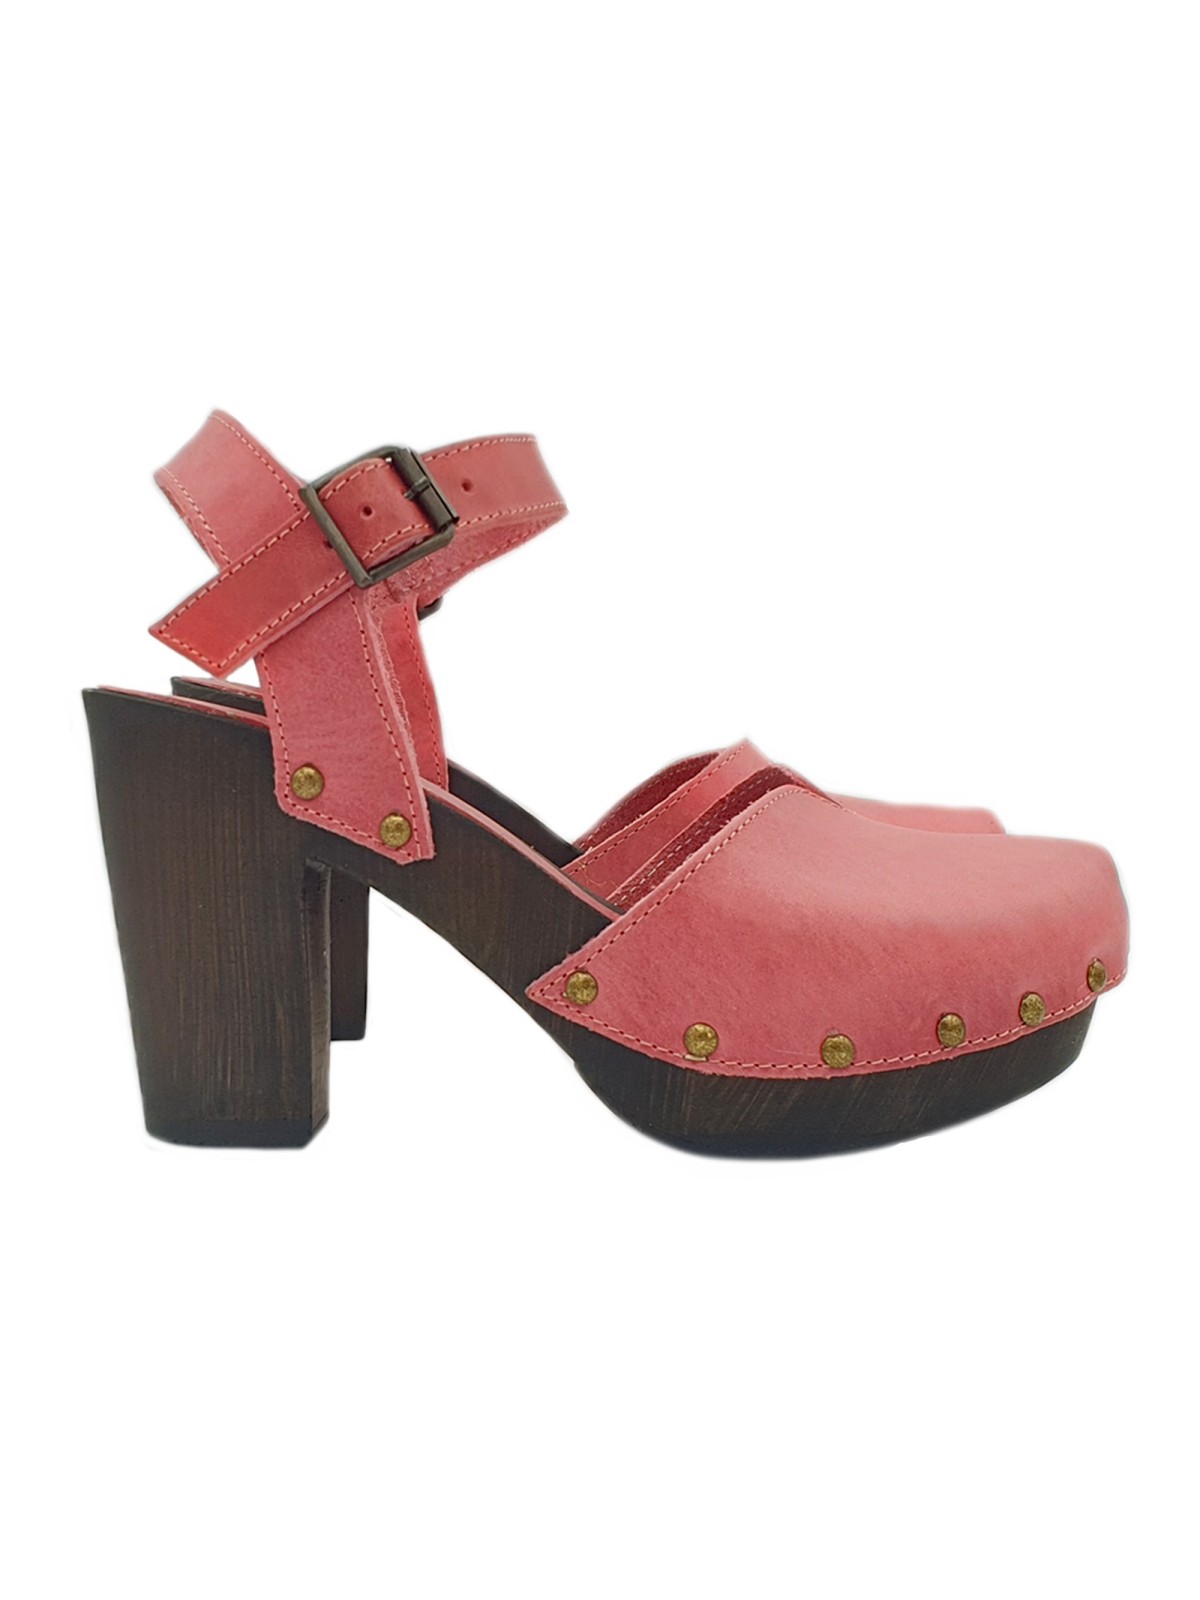 FUCSIA CLOGS WITH ANKLE STRAP AND COMFY HEEL 9